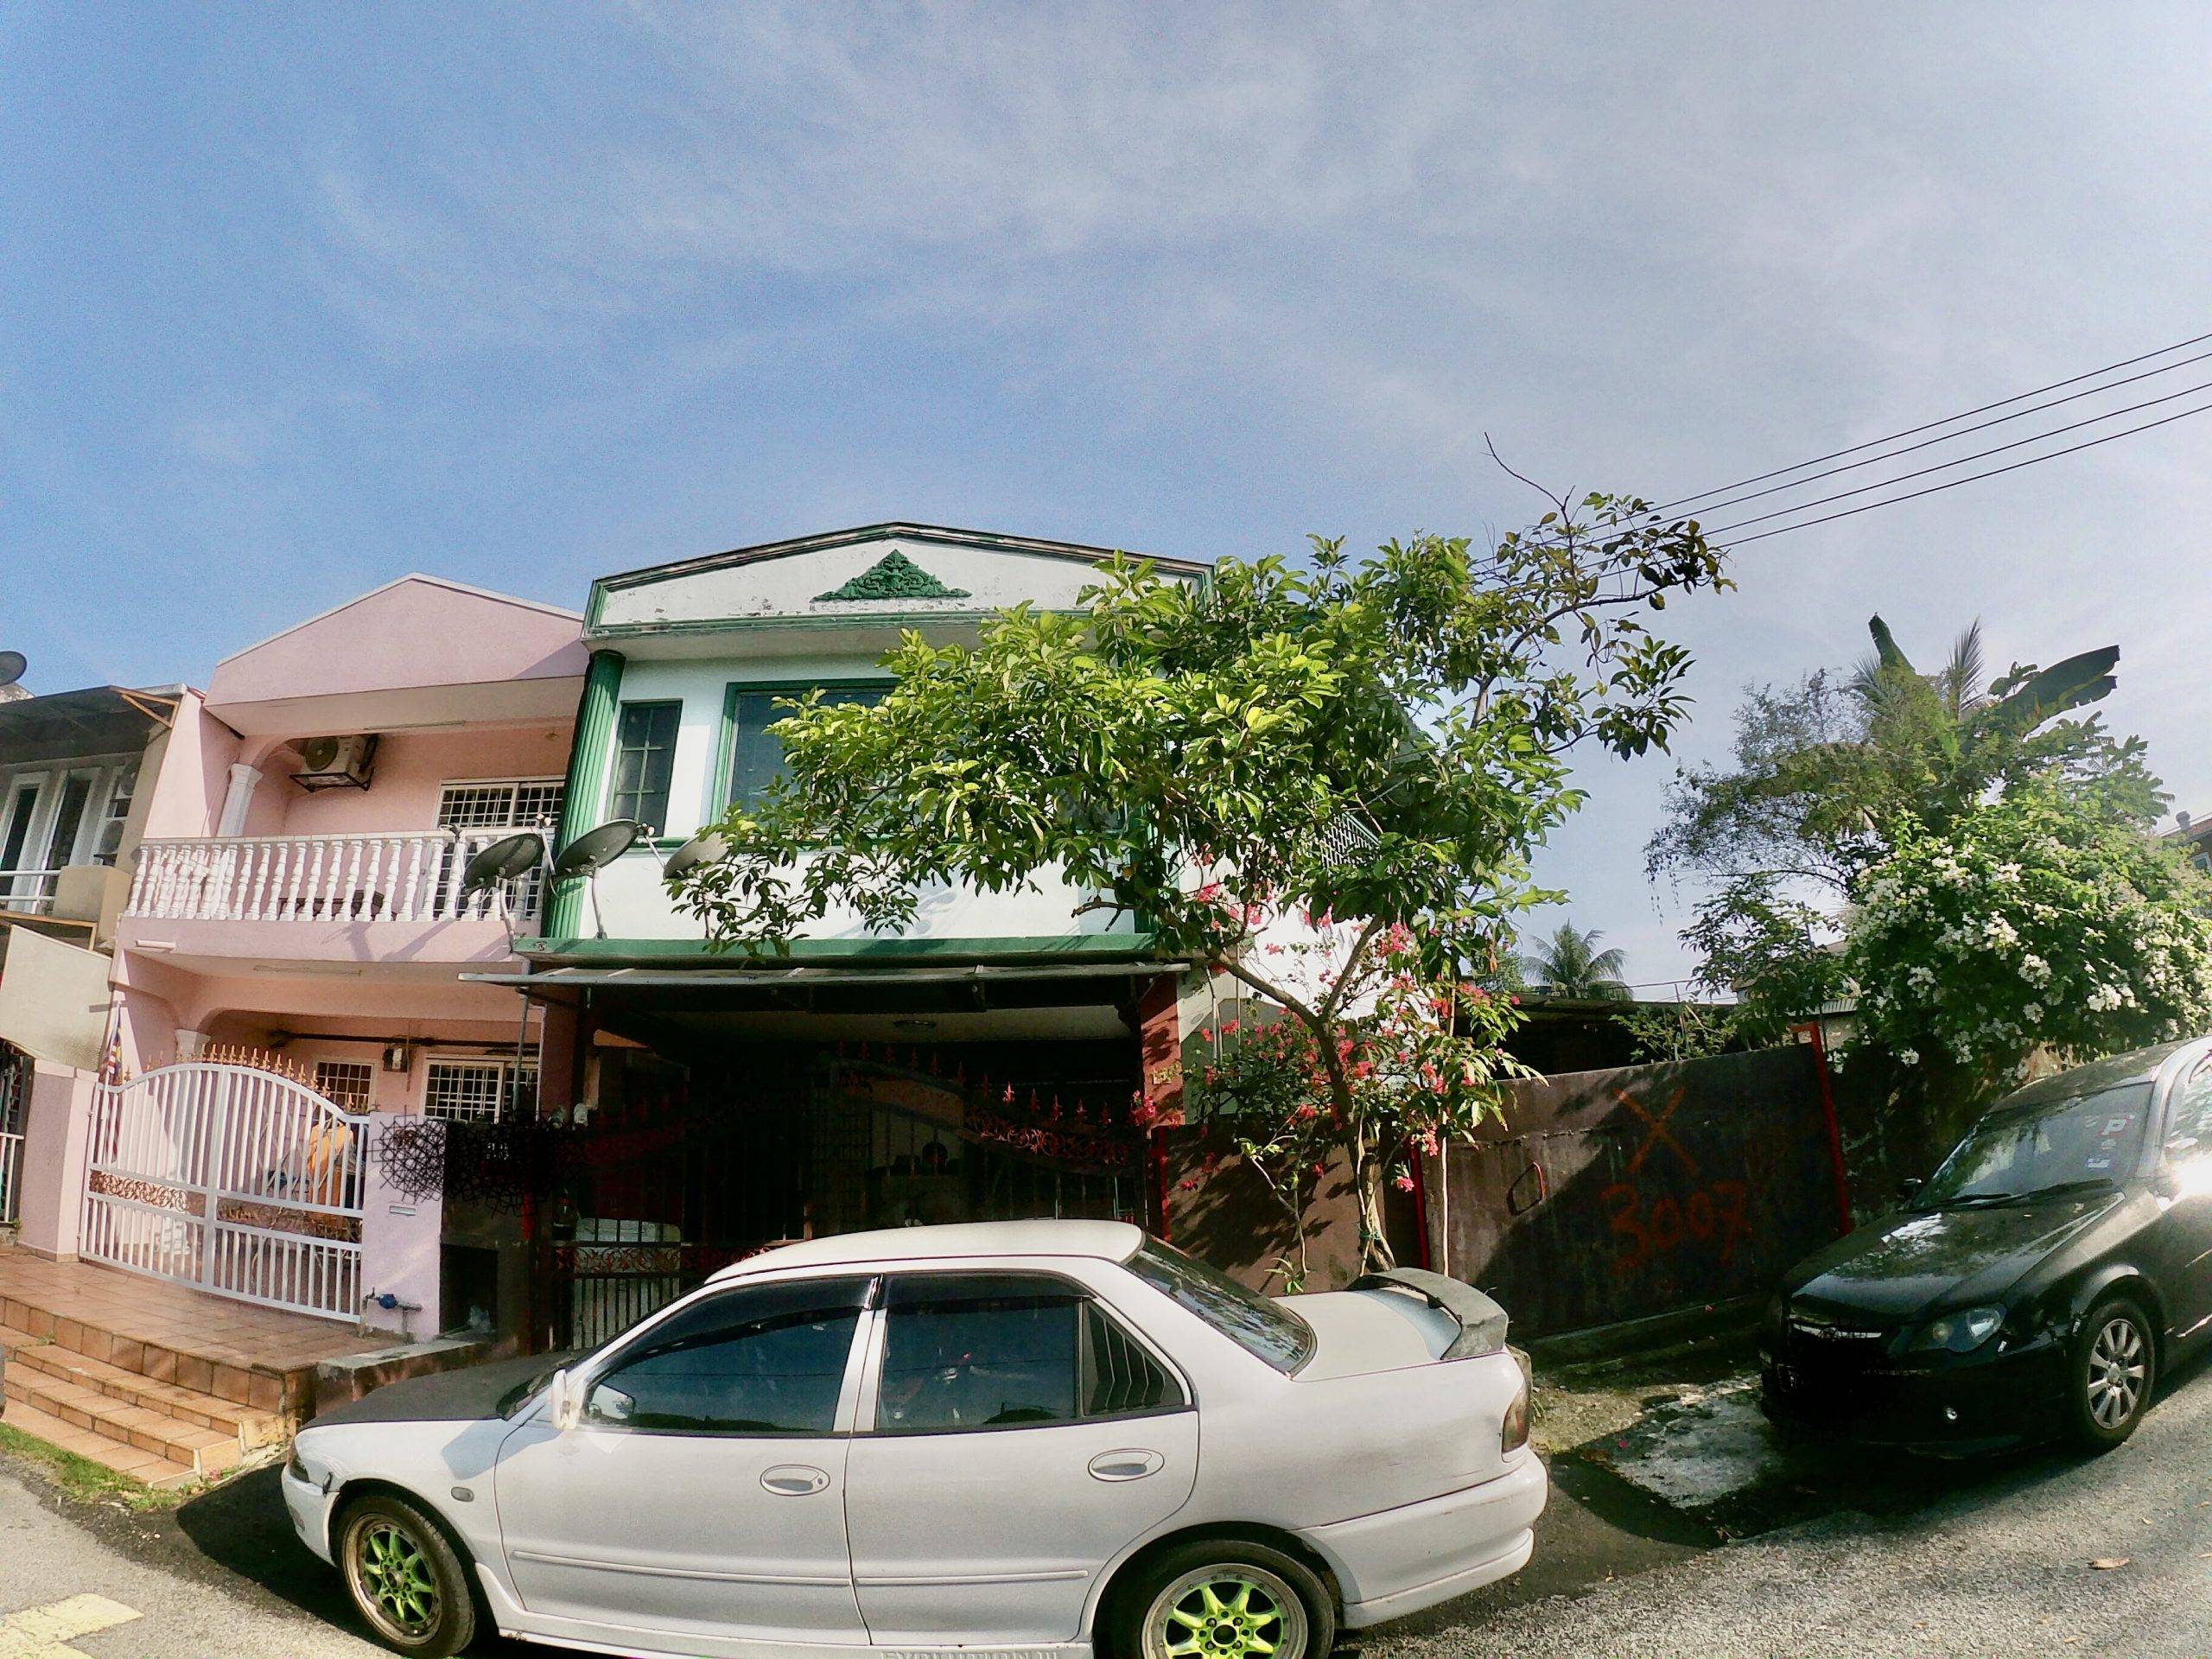 FOR SALE 2 STOREY TERRACE HOUSE TAMAN KENCANA AMPANG FULLY EXTENDED WITH APPROVAL